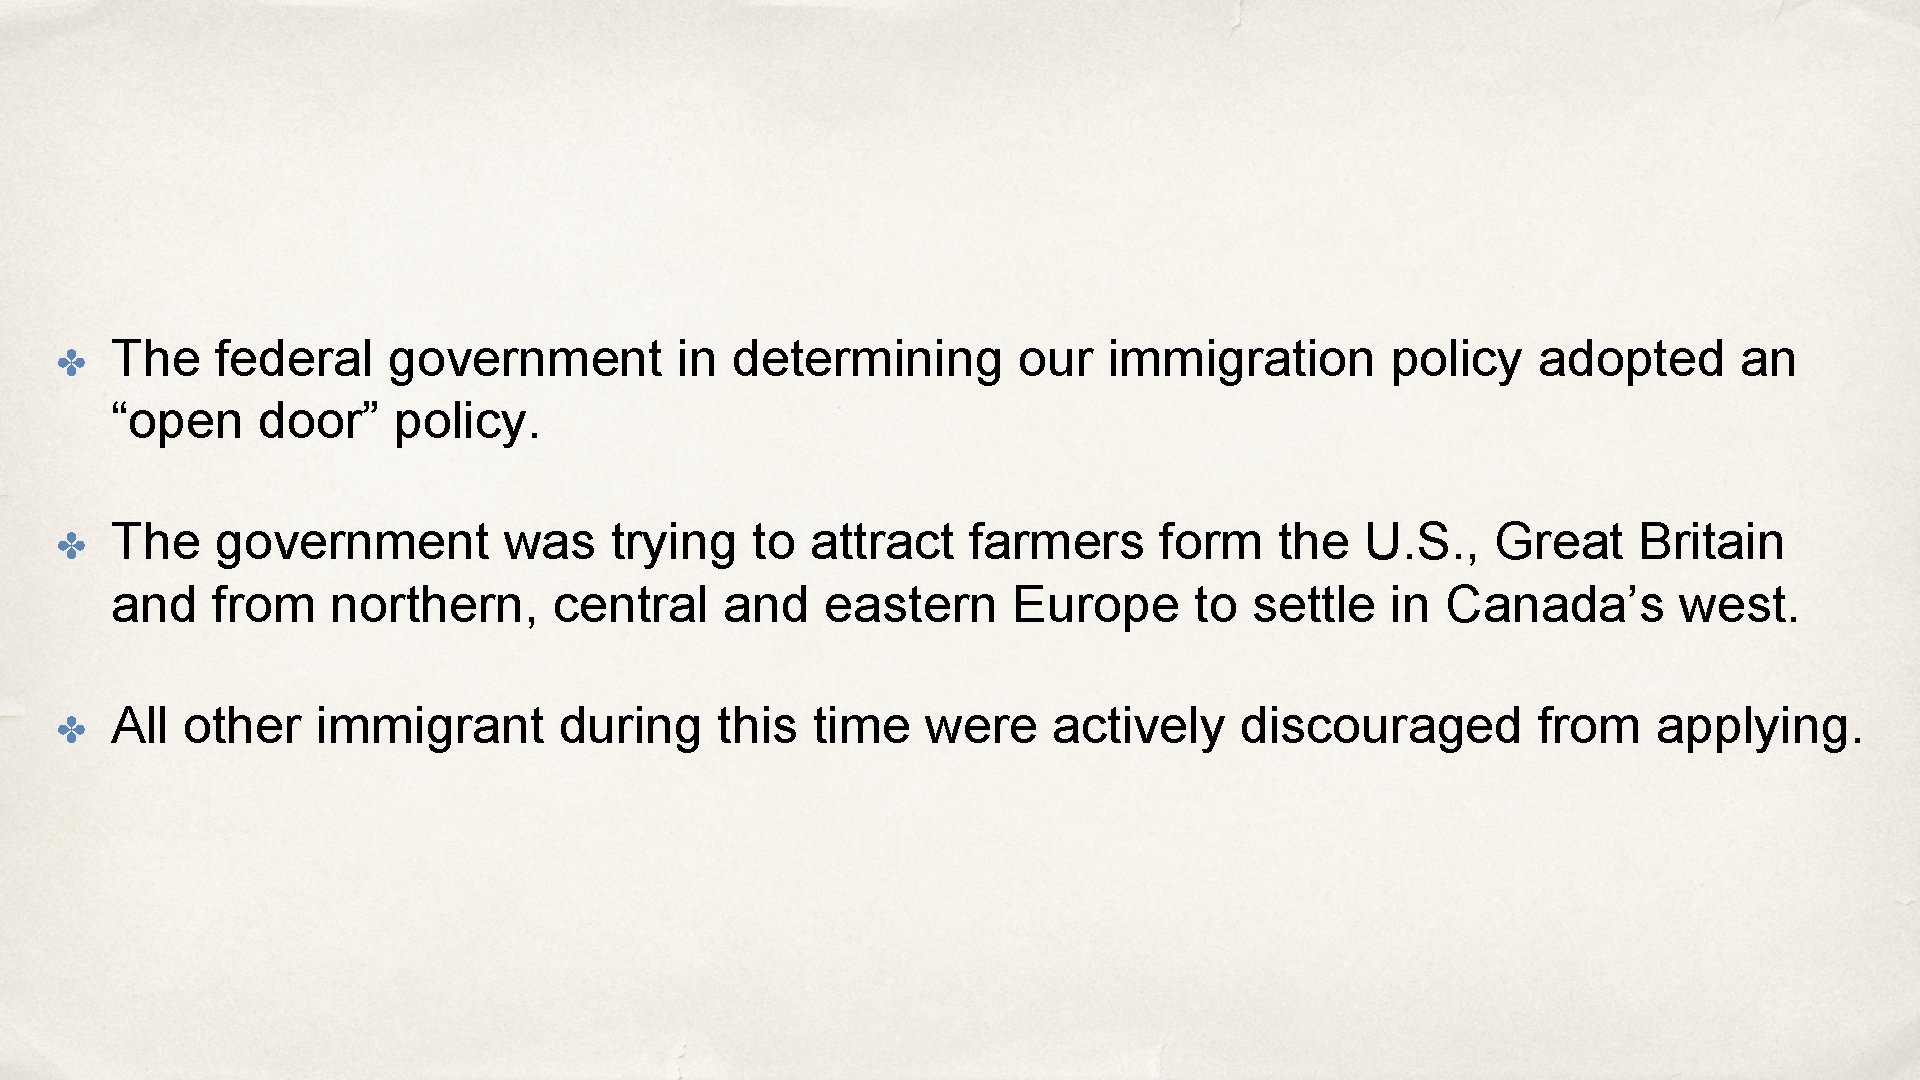 ✤ The federal government in determining our immigration policy adopted an “open door” policy.